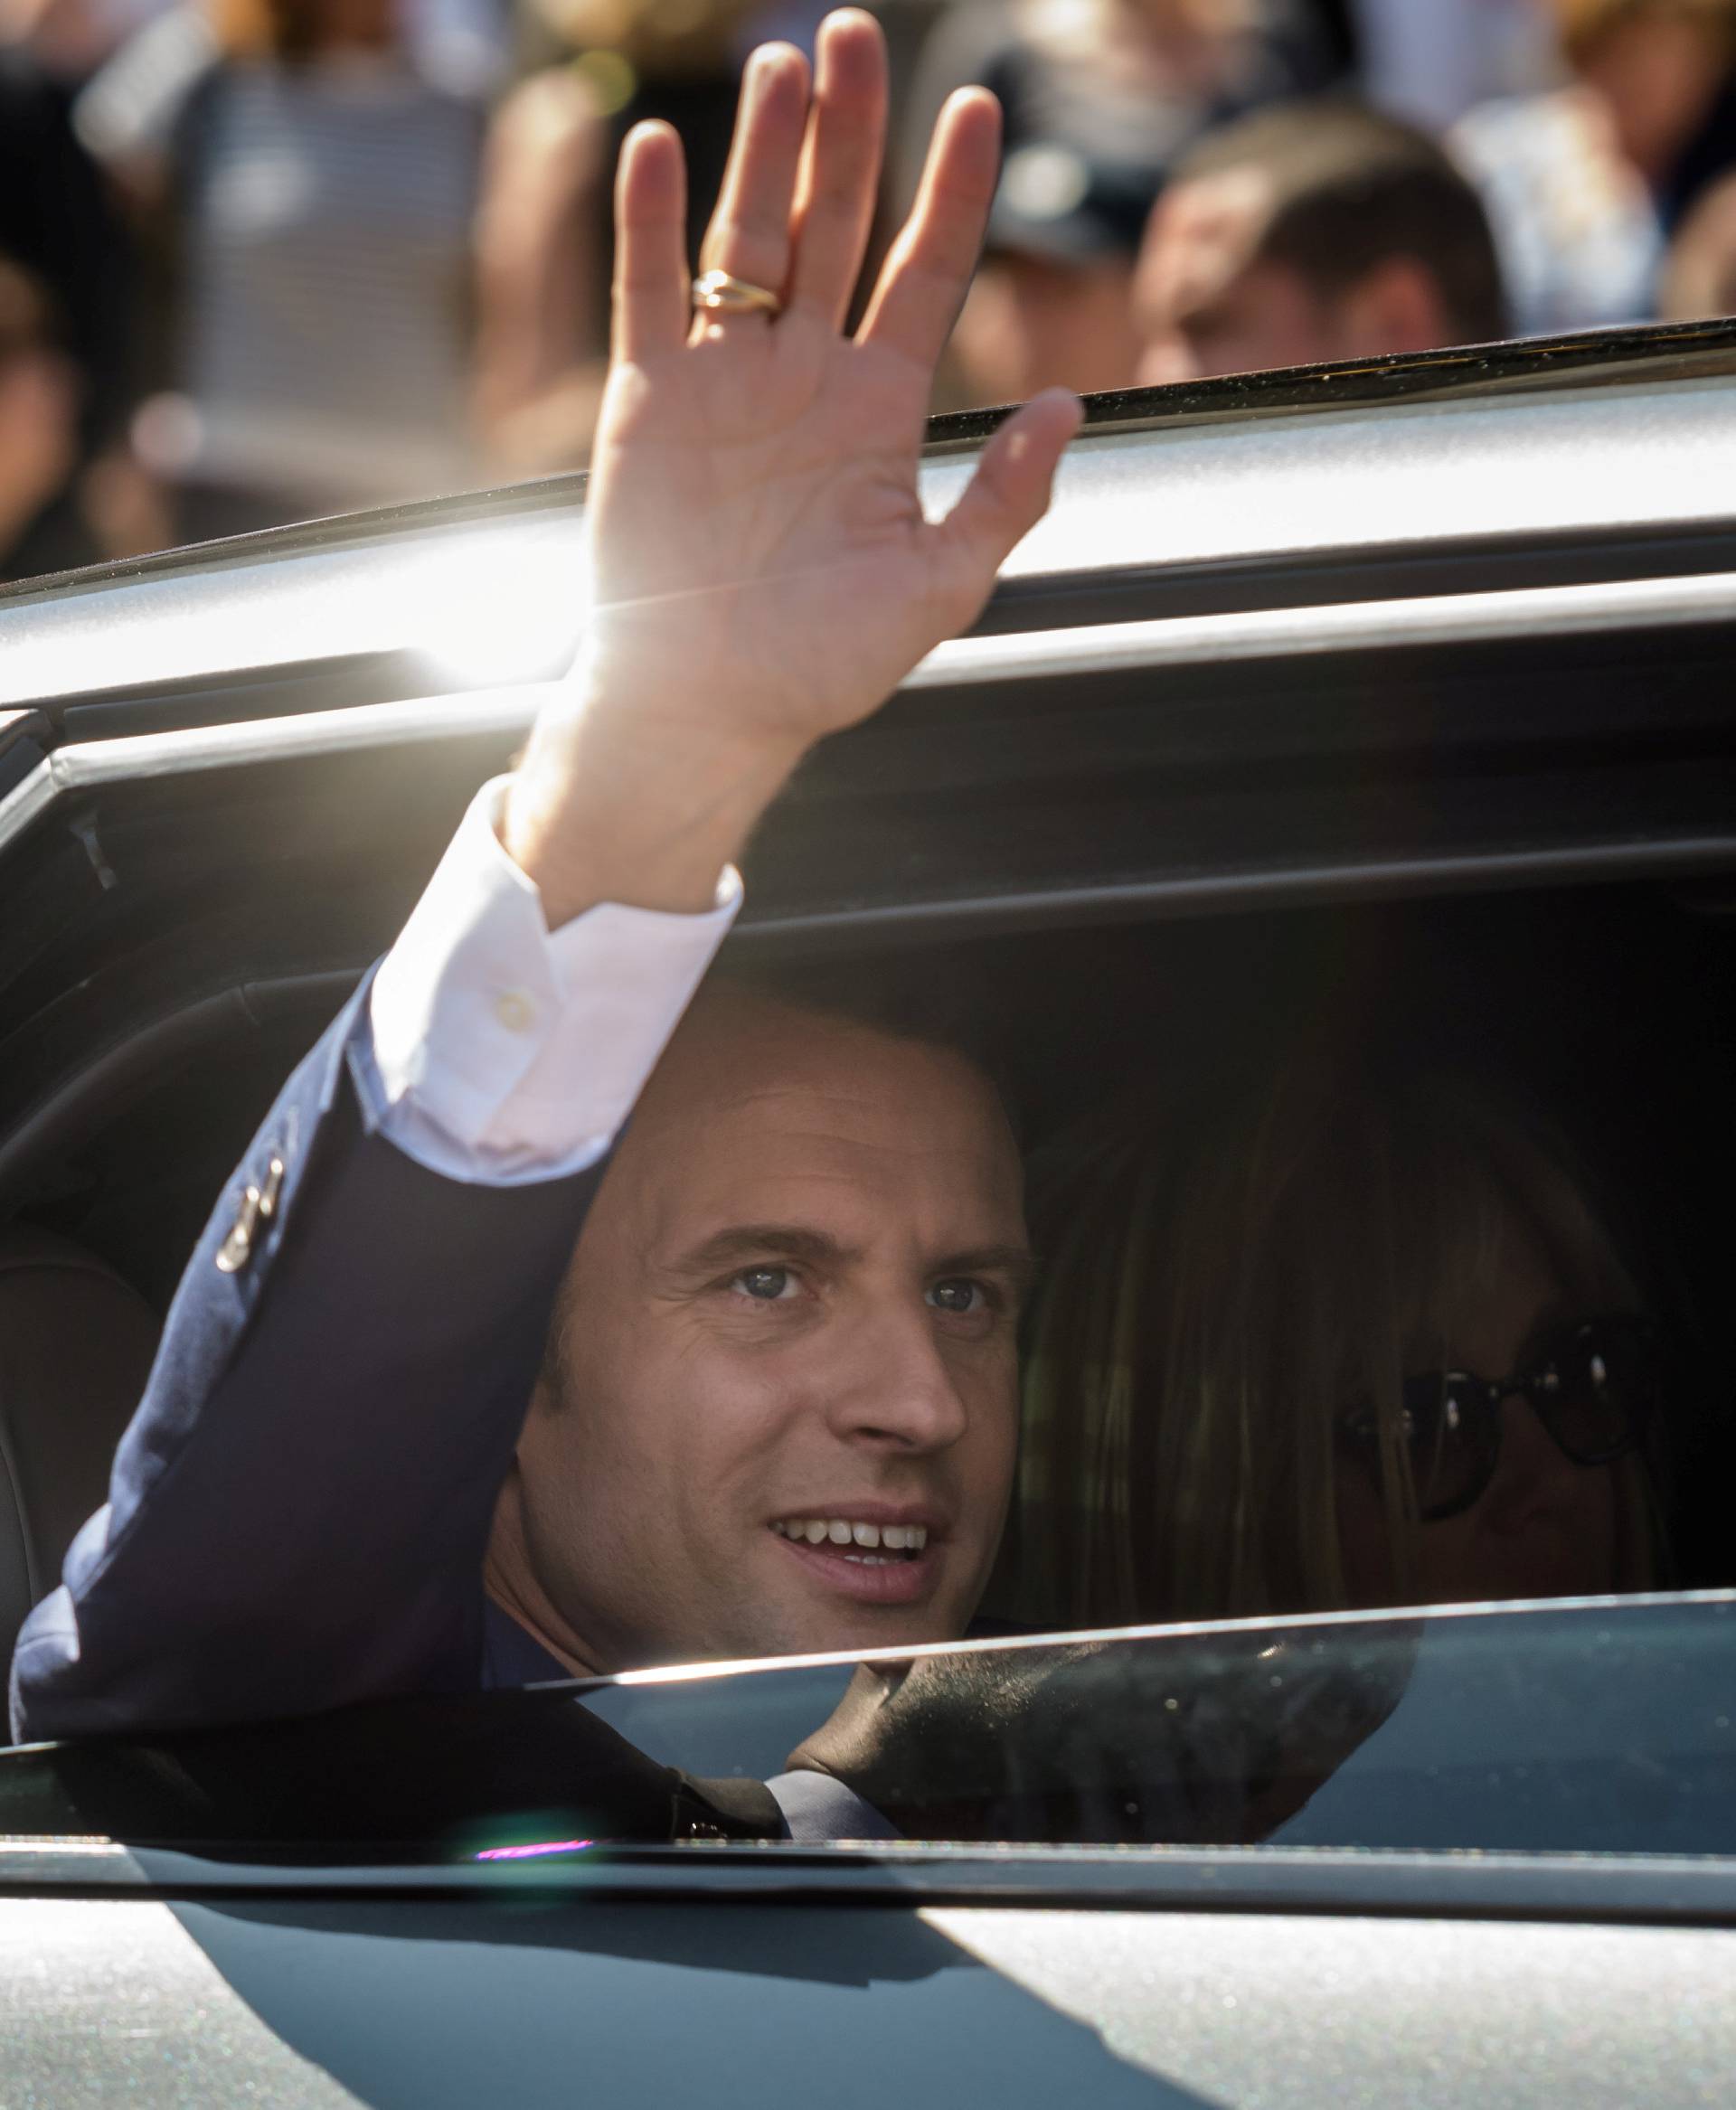 French President Emmanuel Macron leaves polling station after voting in parliamentary elections in Le Touquet